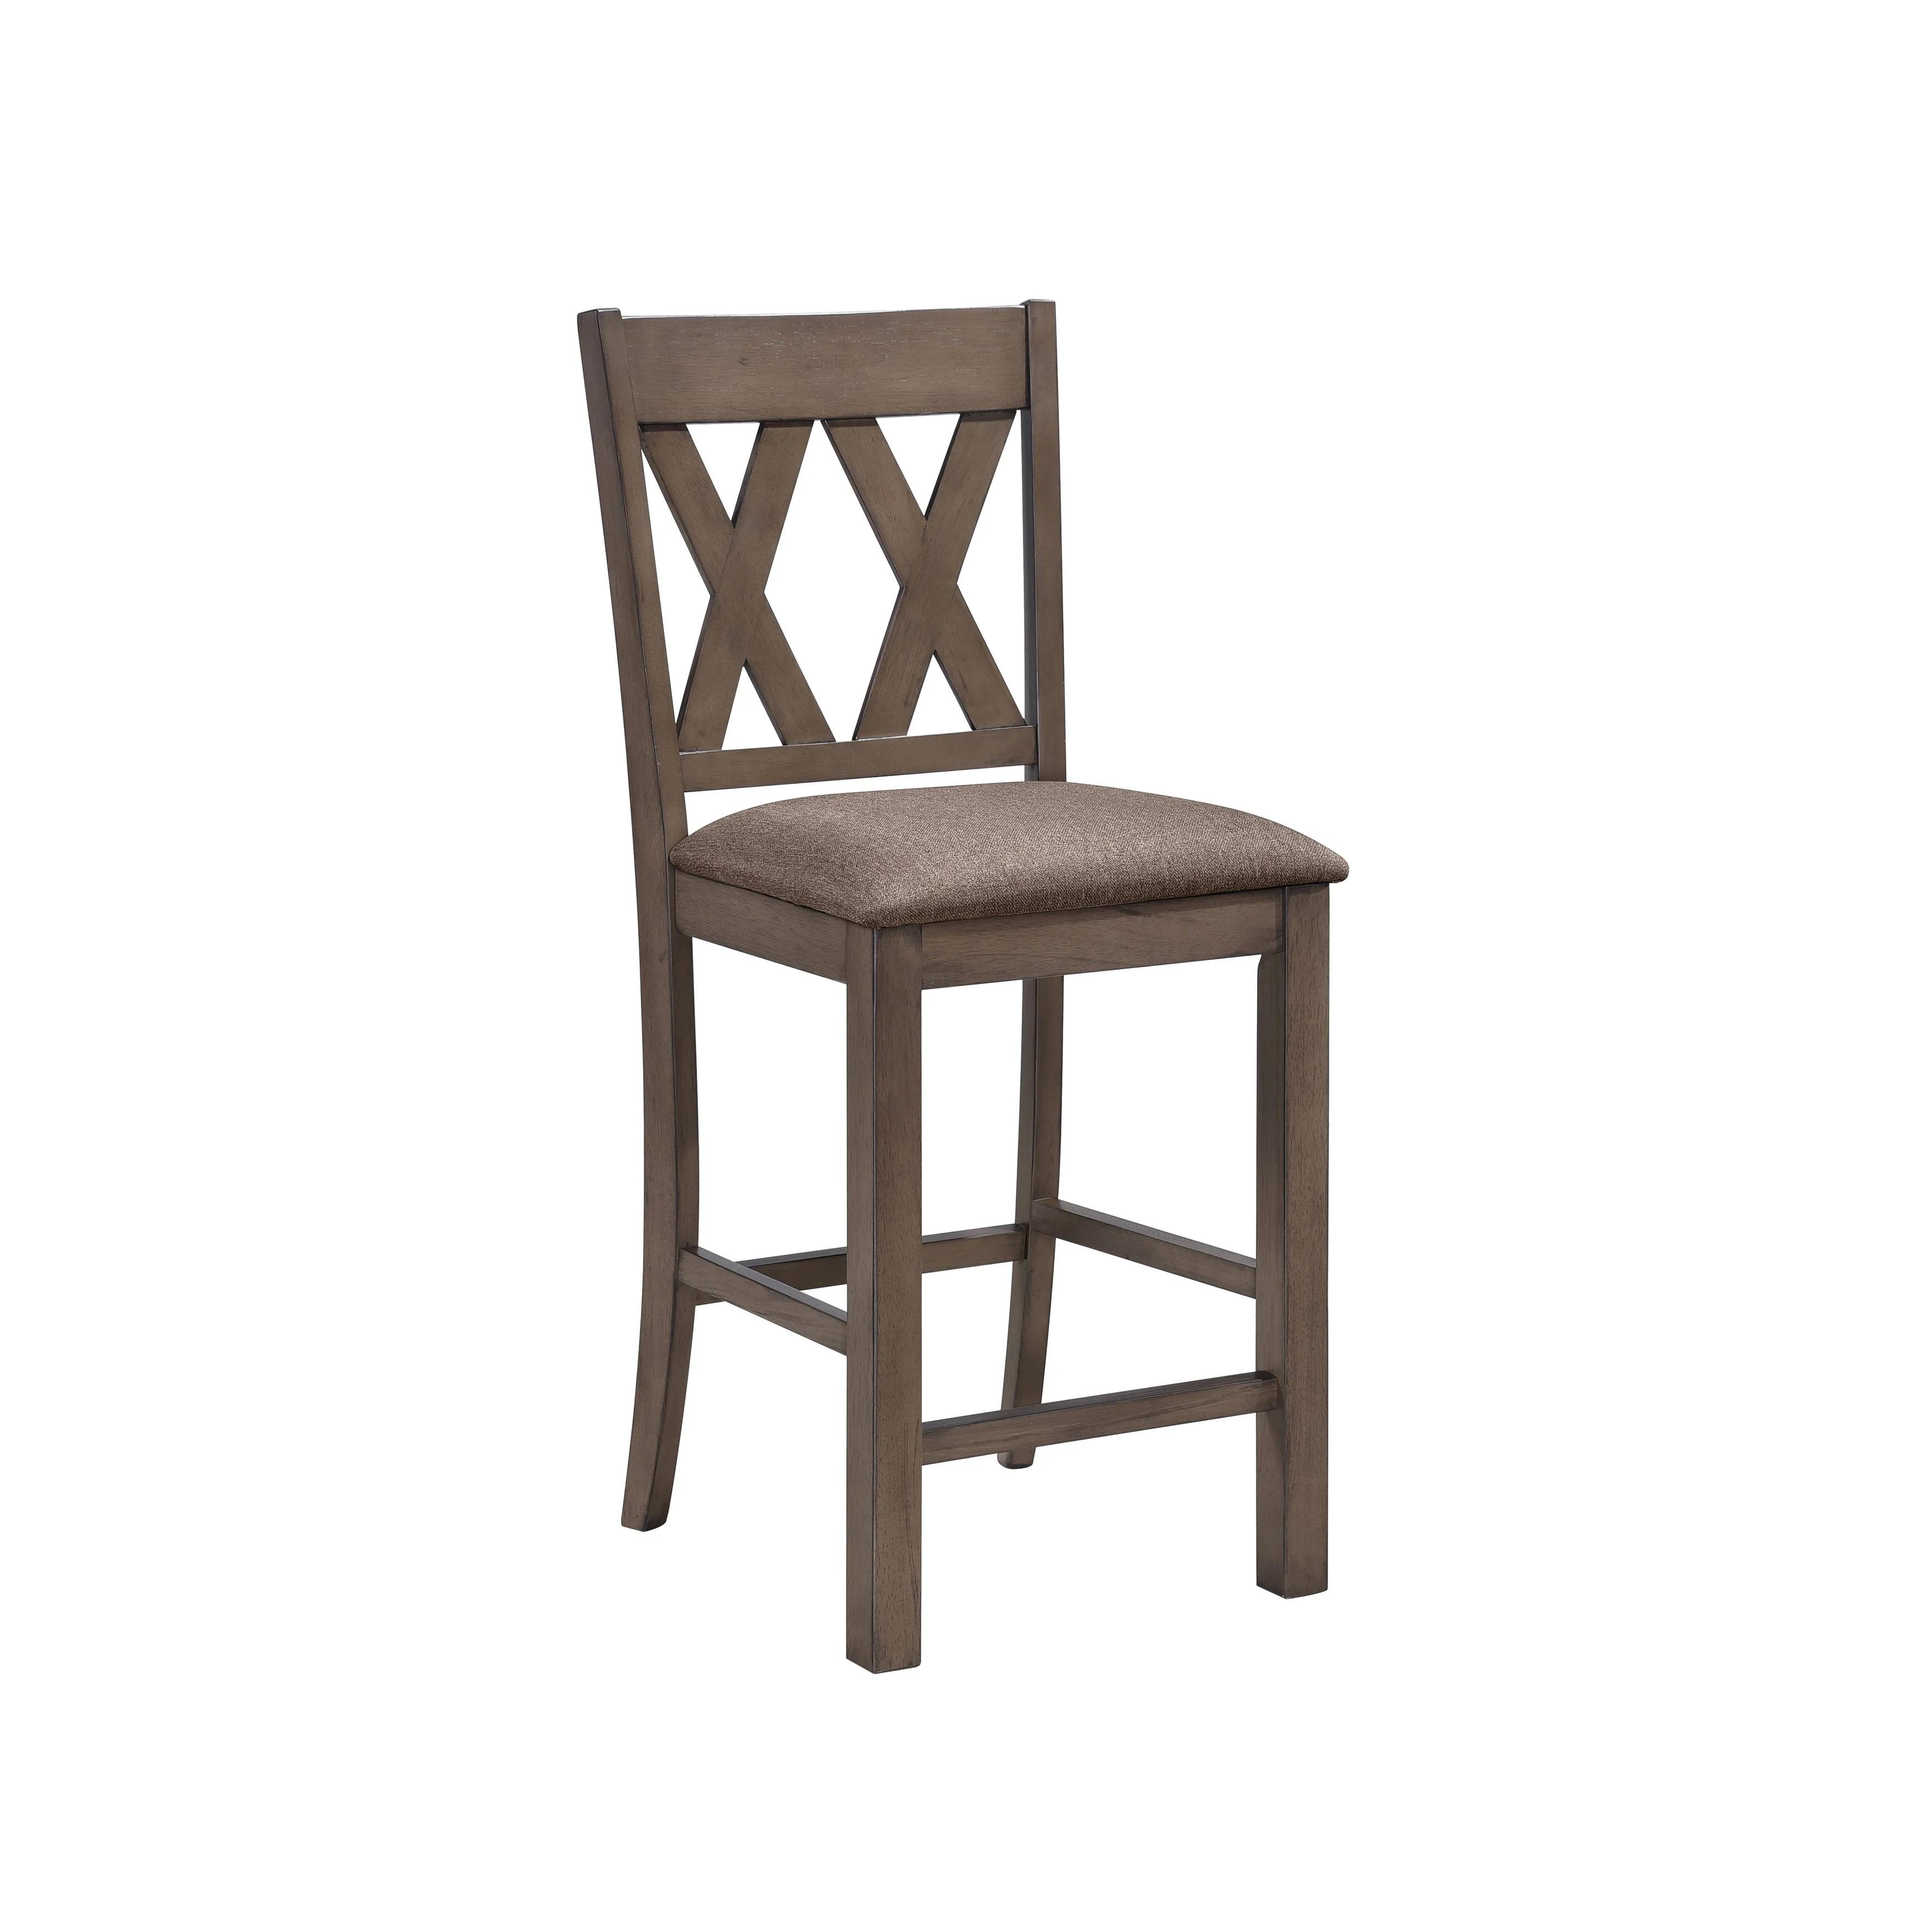 Rustic Counter Height Chair Scarlett 72477-2pcs in Walnut Fabric